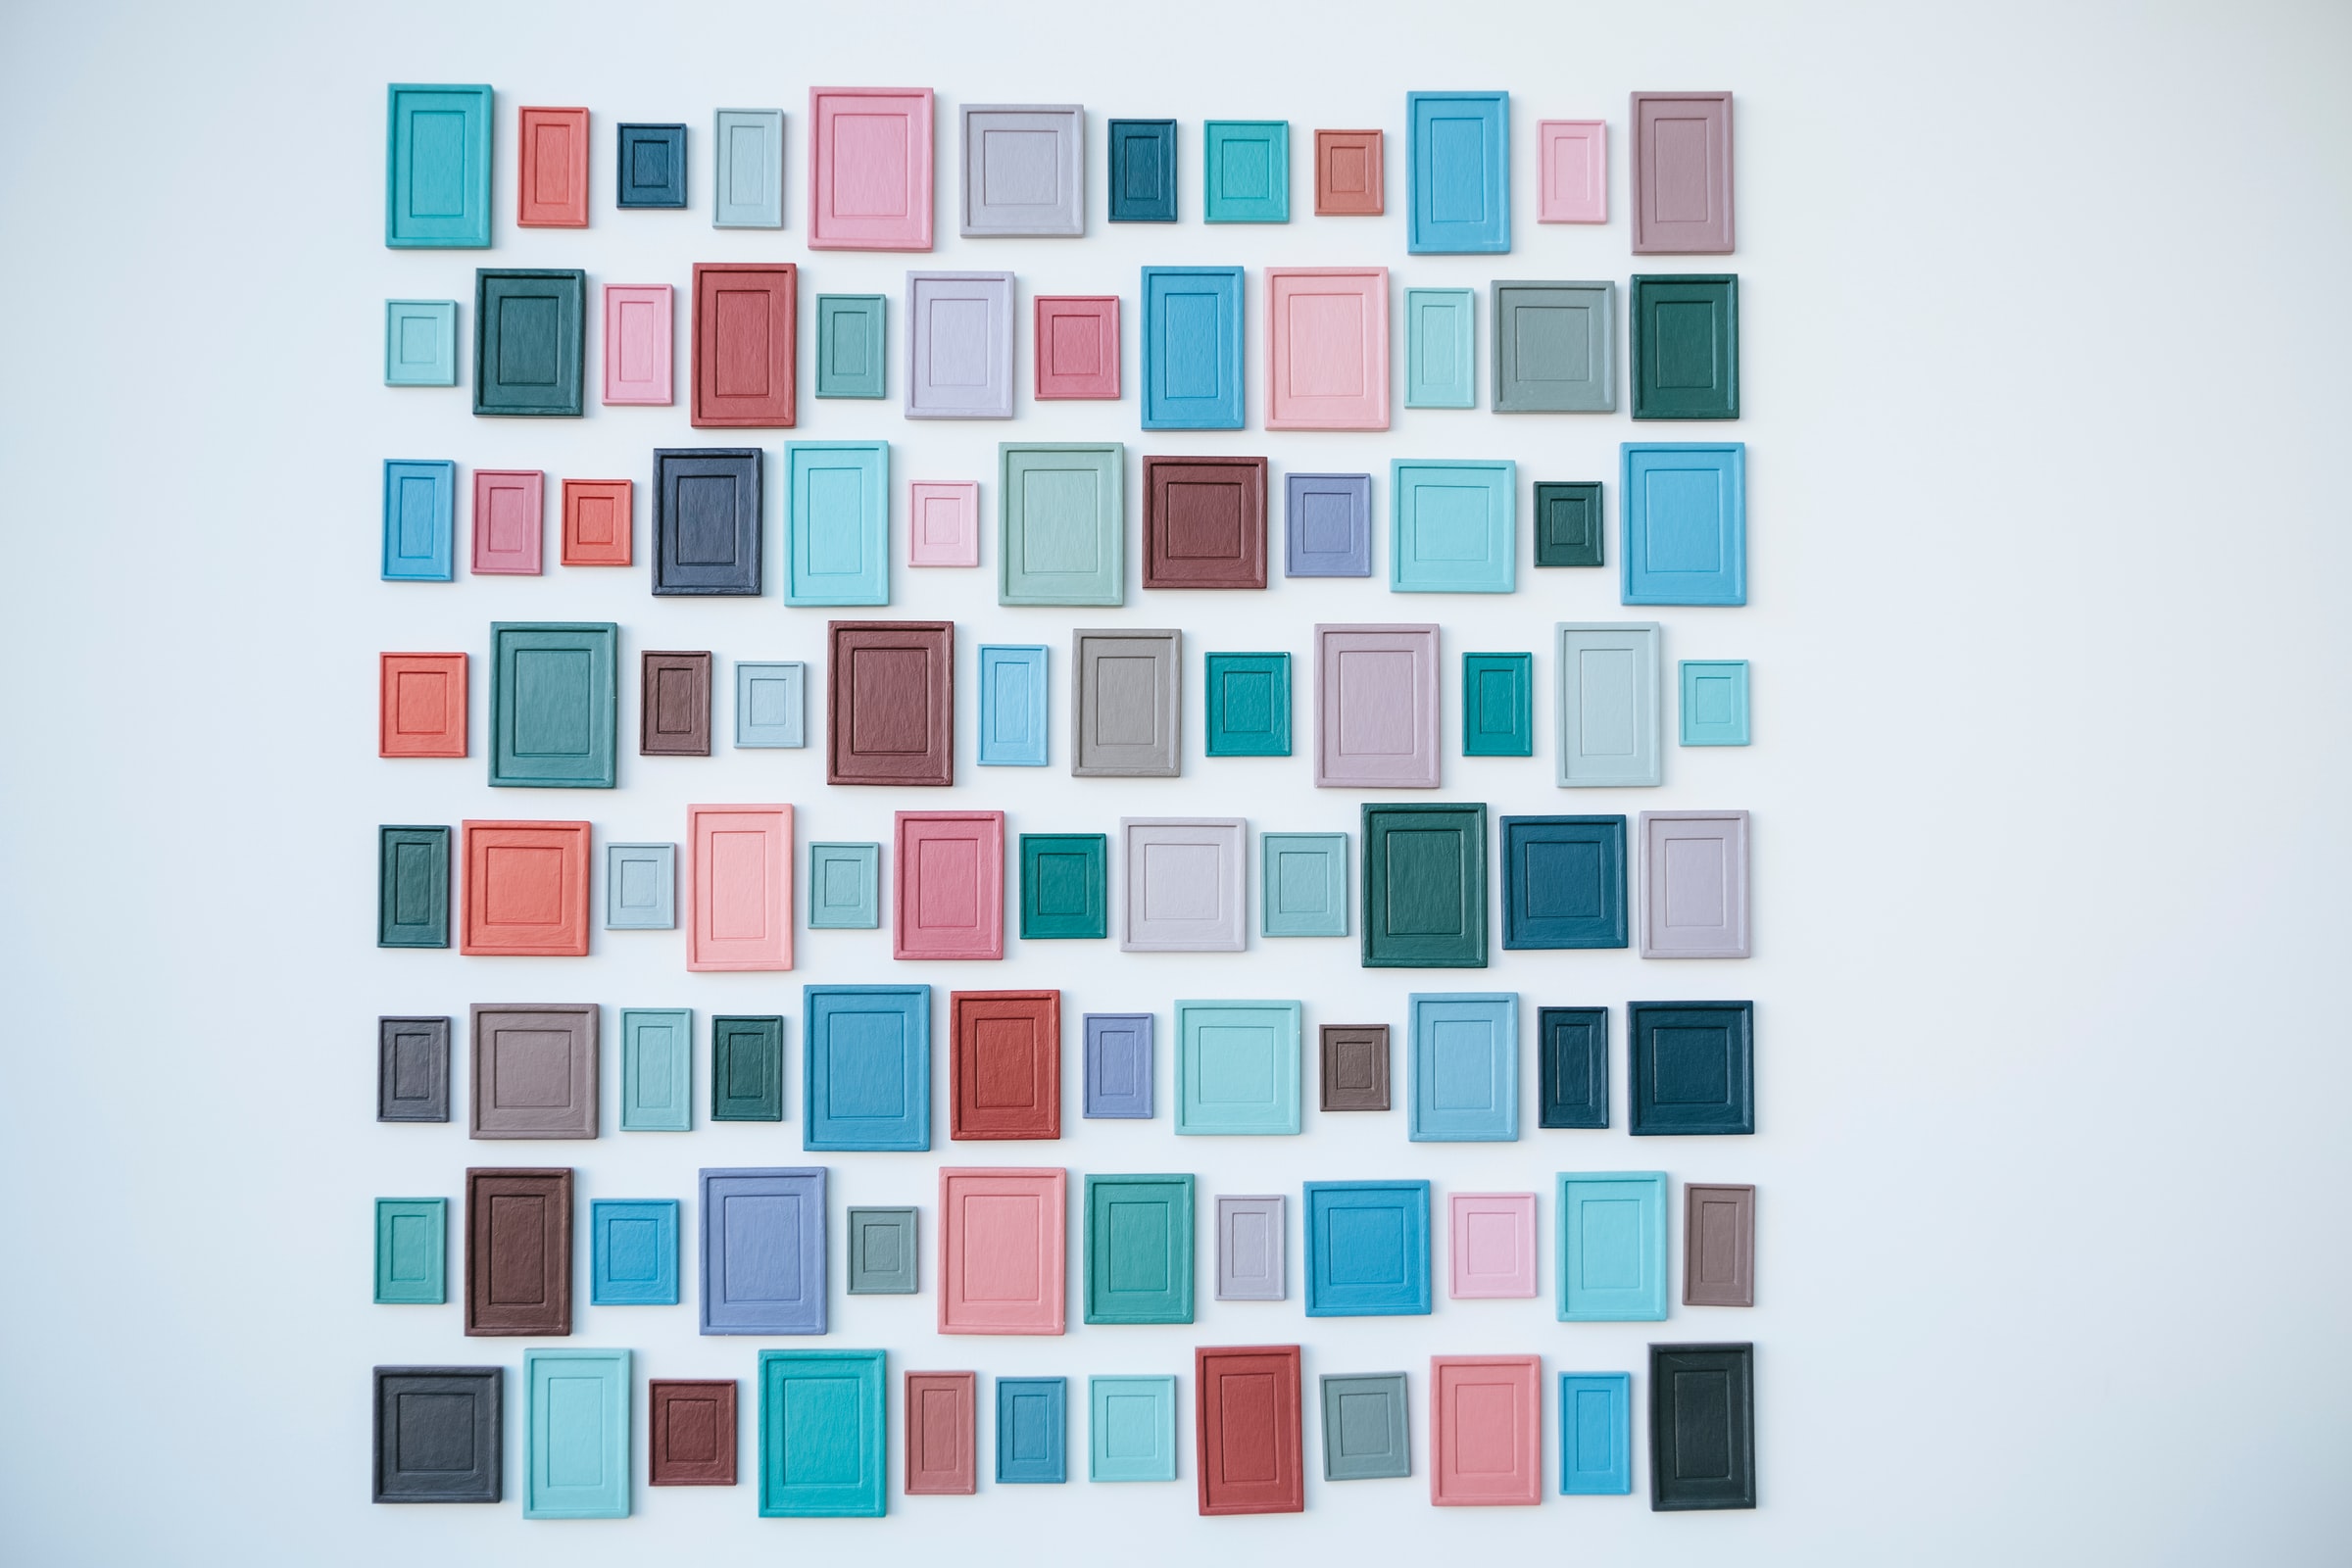 Photograph of colored squares hanging on a wall